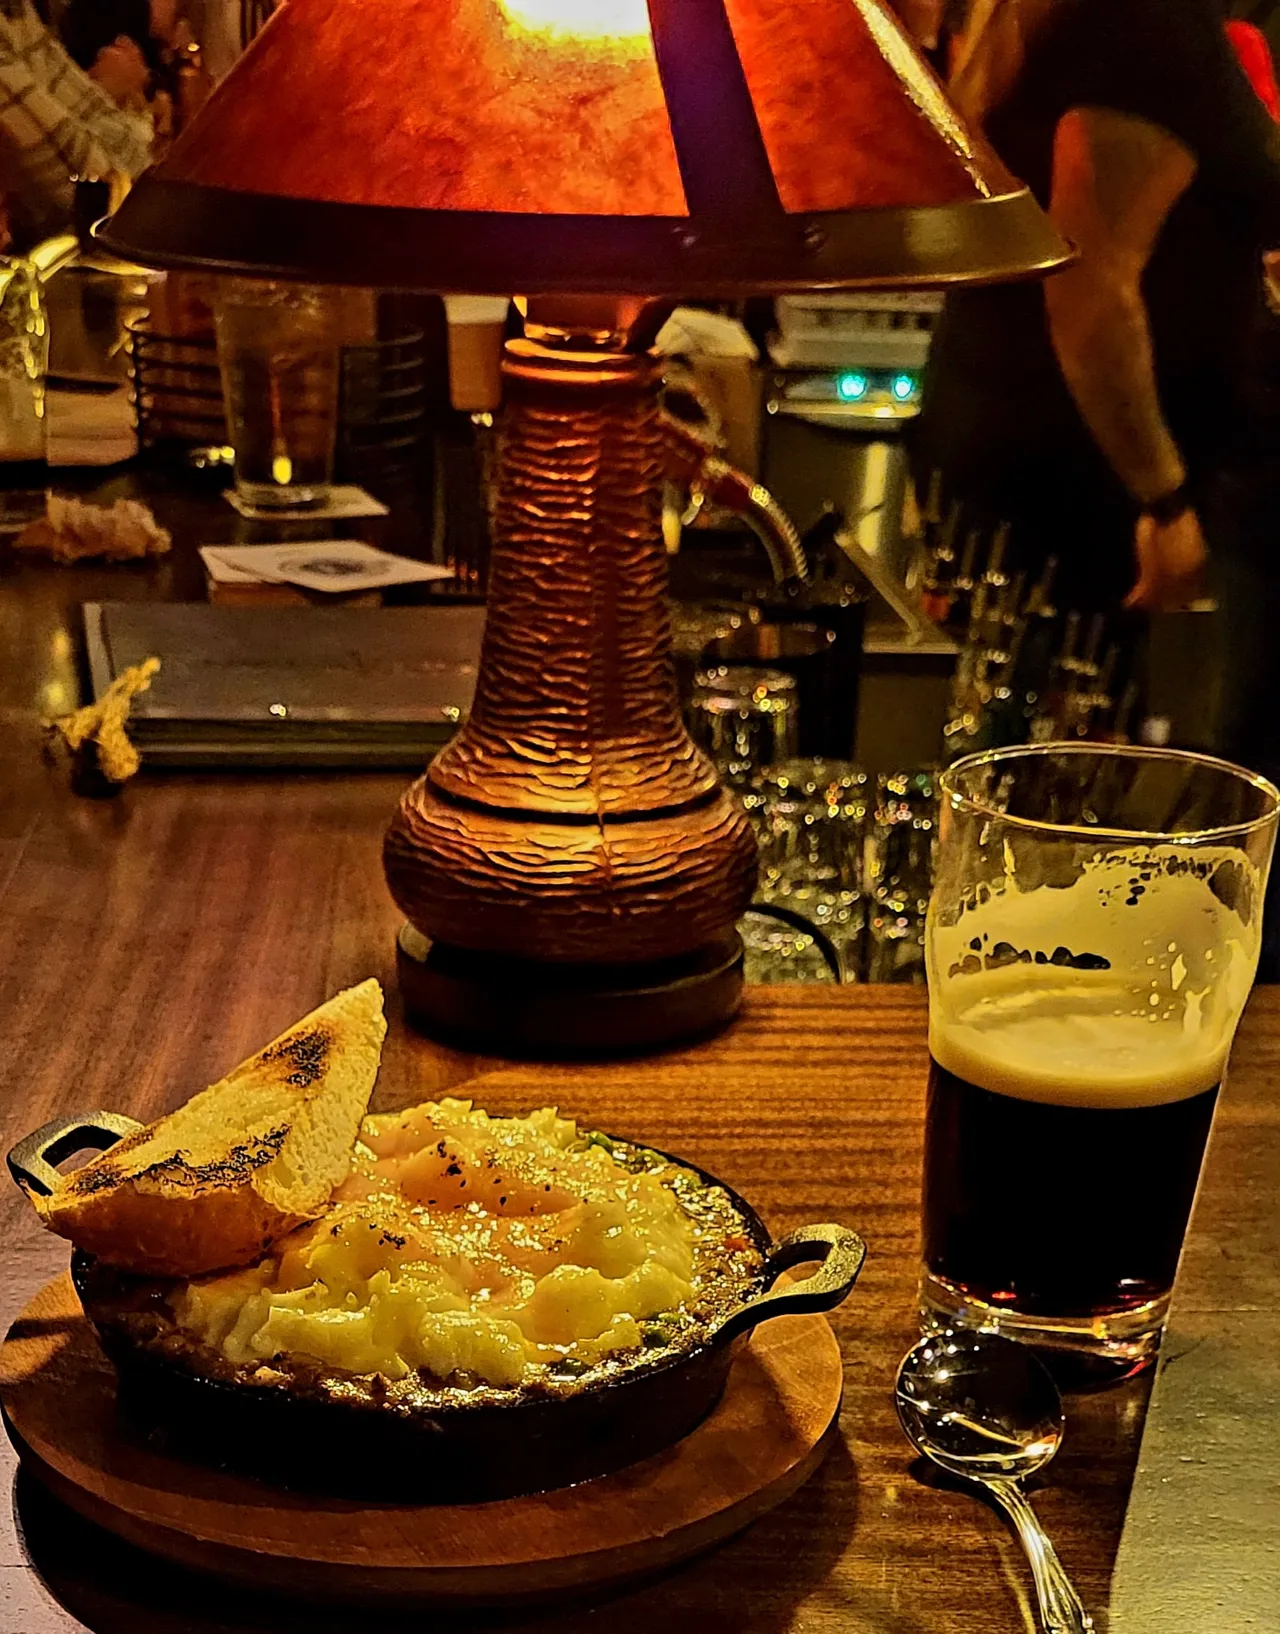 A cast iron skillet with bread and a half full glass of beer.